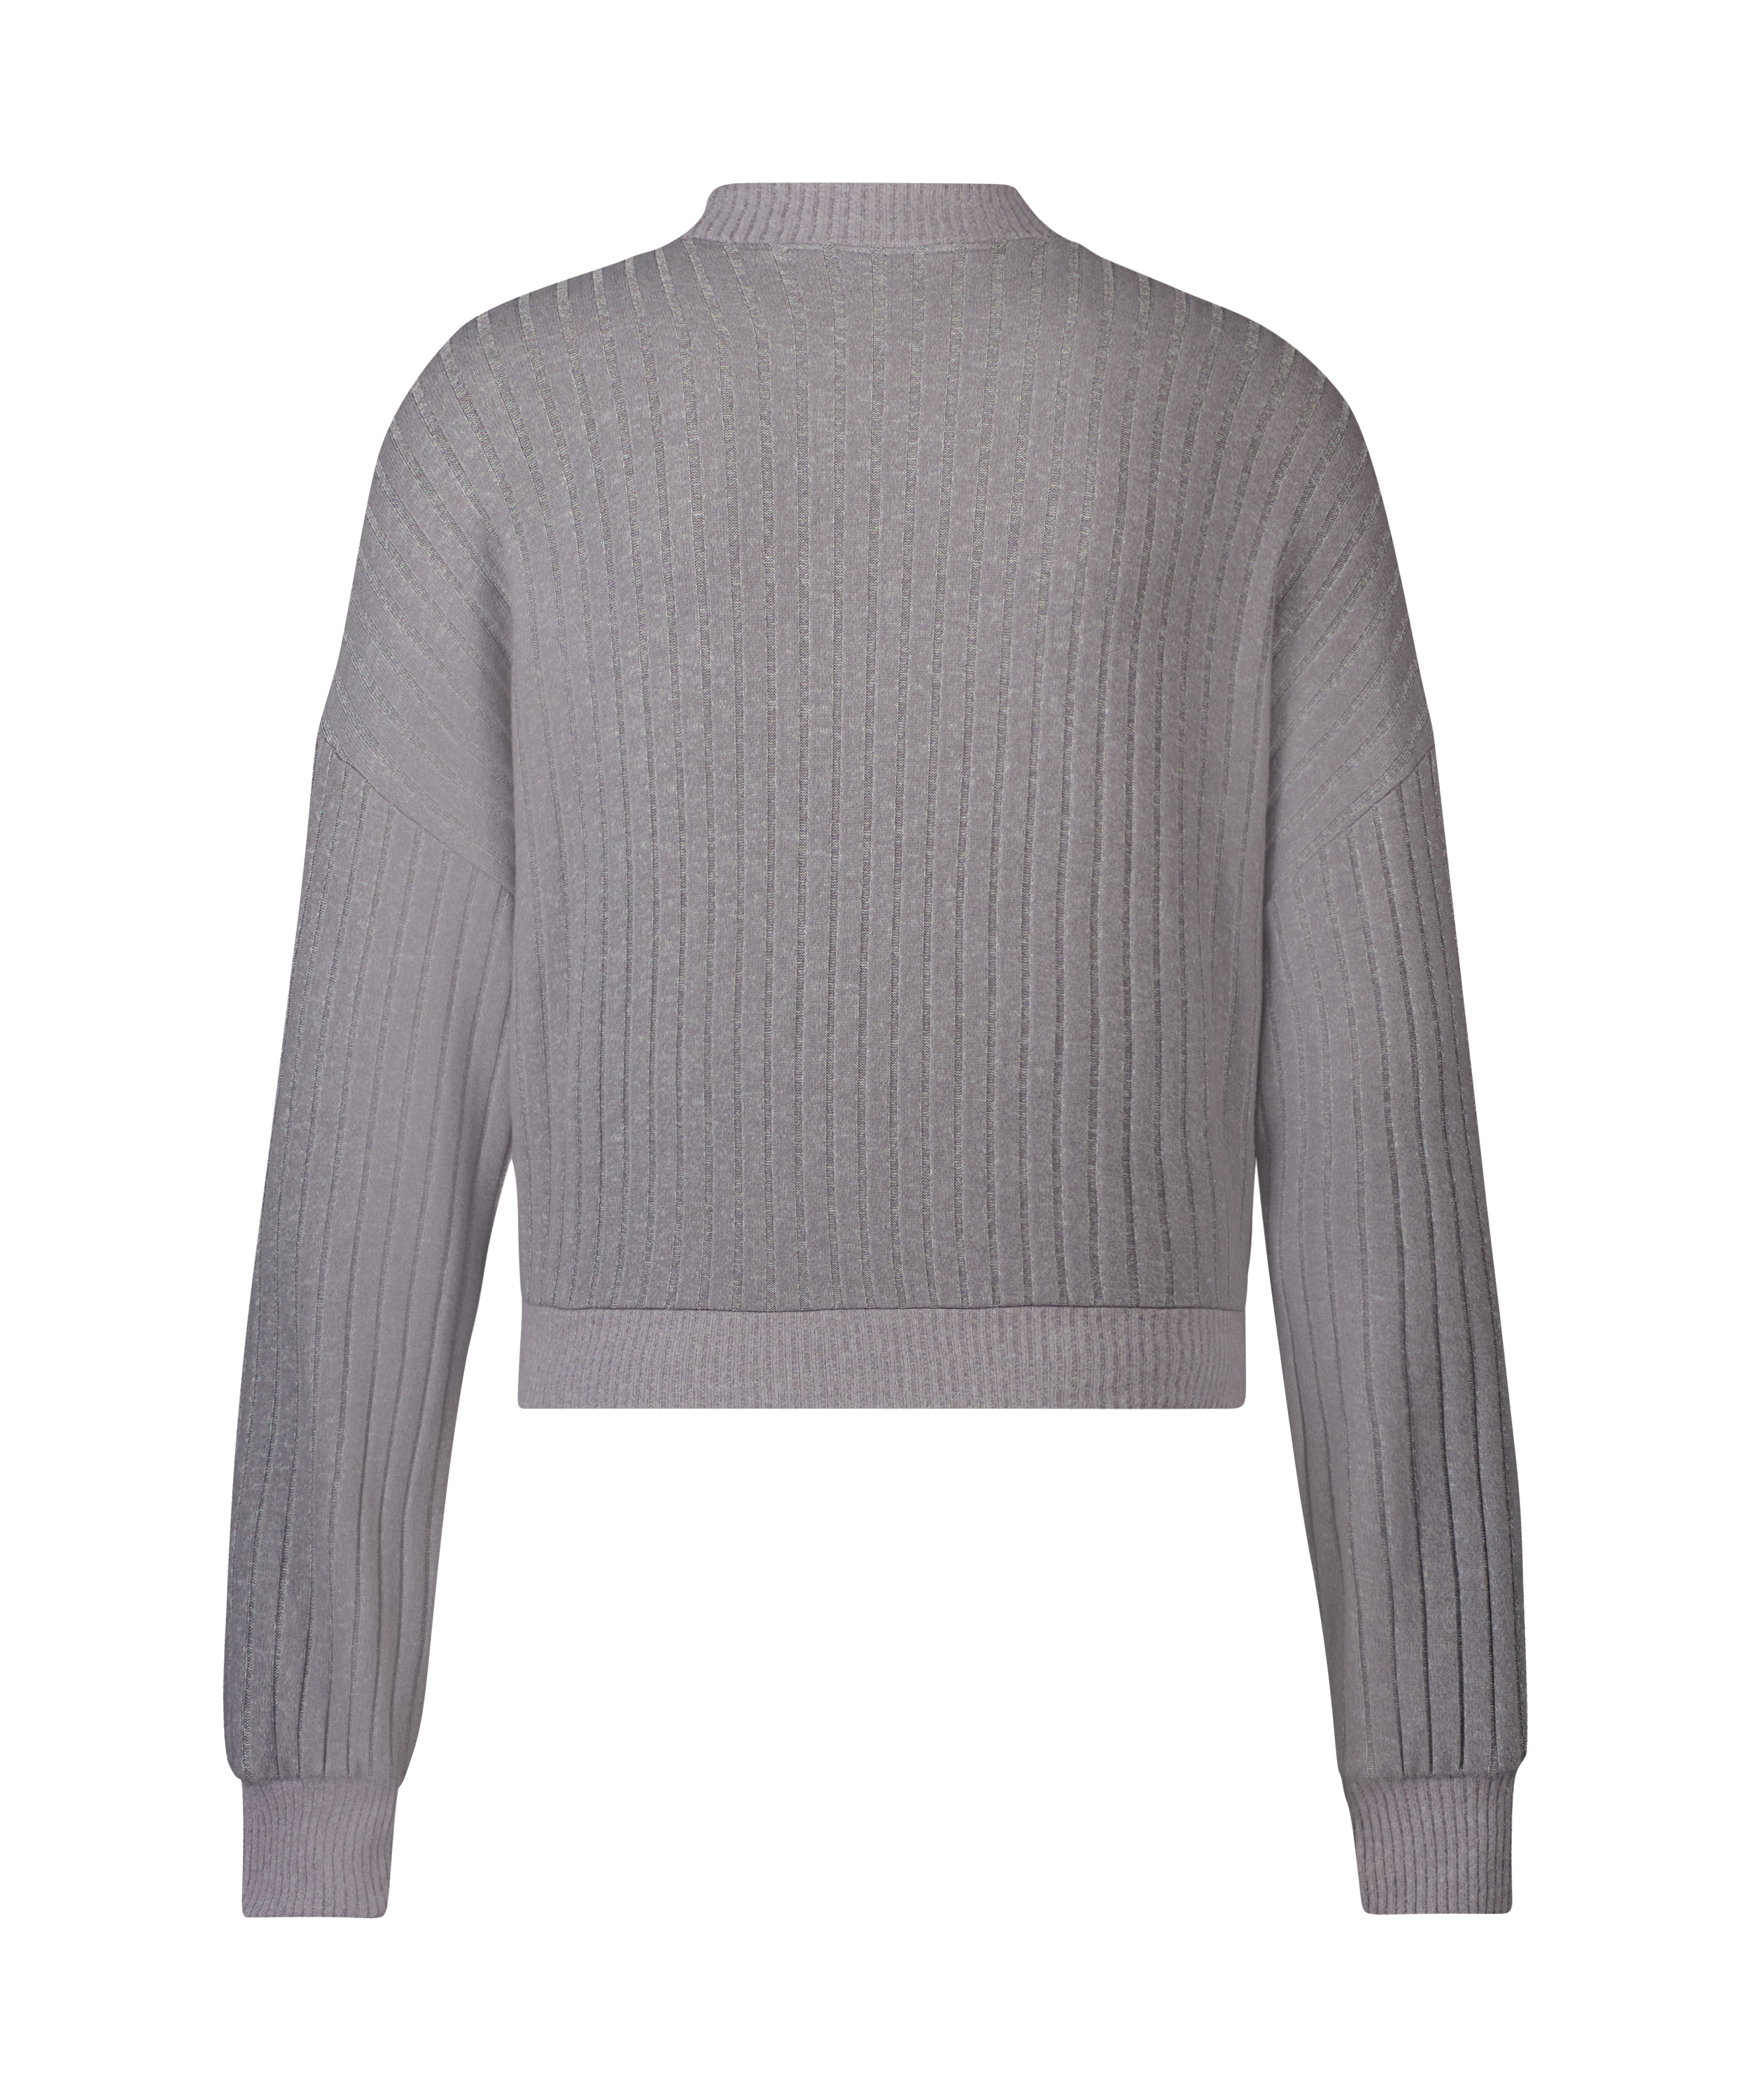 Top Manches Longues Brushed Rib, Gris, main